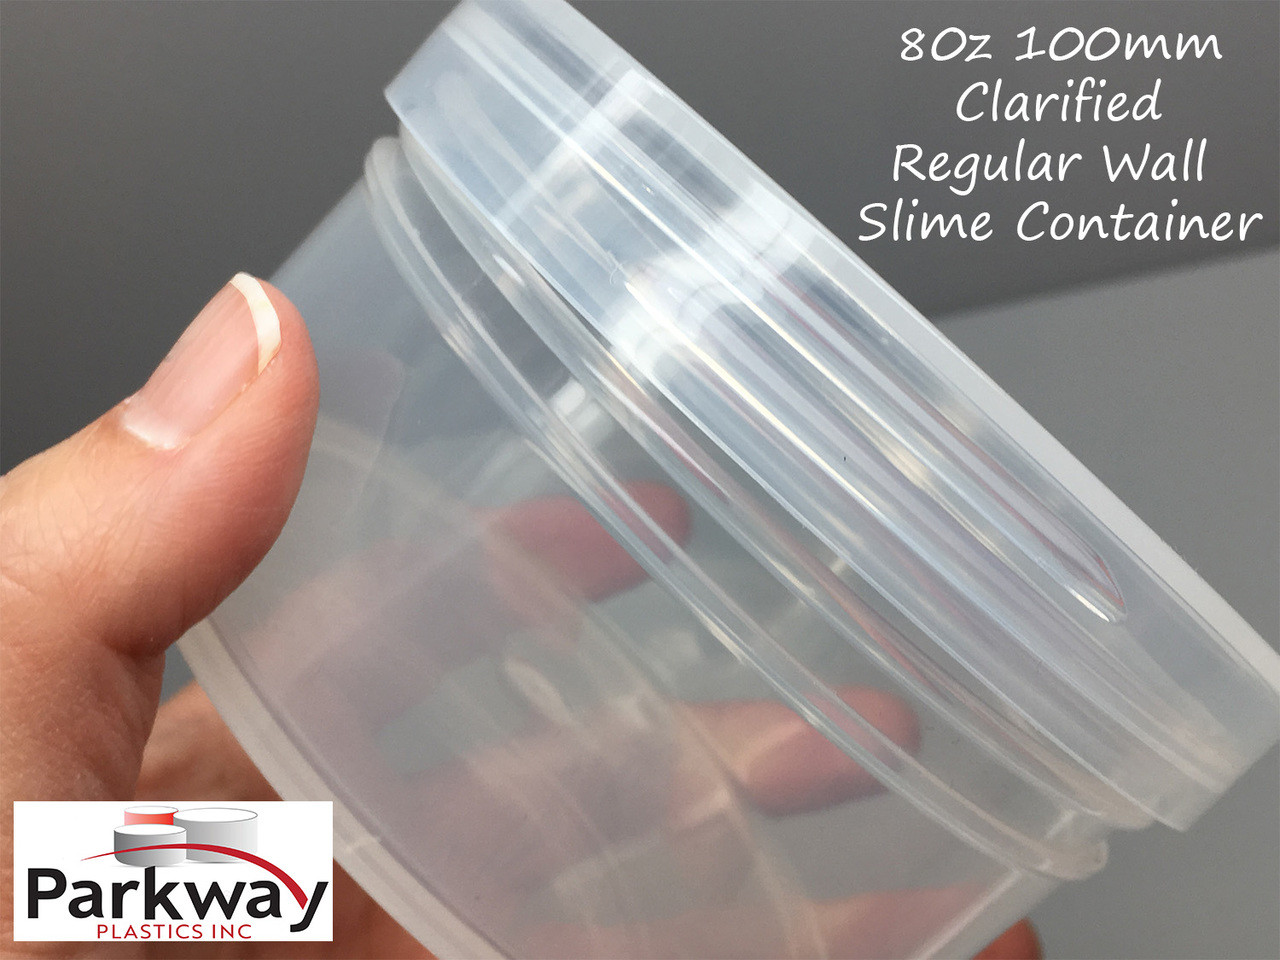 https://cdn2.bigcommerce.com/server3300/hqacnni7/products/538/images/5516/100mm_8oz_clarified_jar_and_lid_from_Parkway_Plastics_with_text__88650.1554383965.1280.1280.jpg?c=2